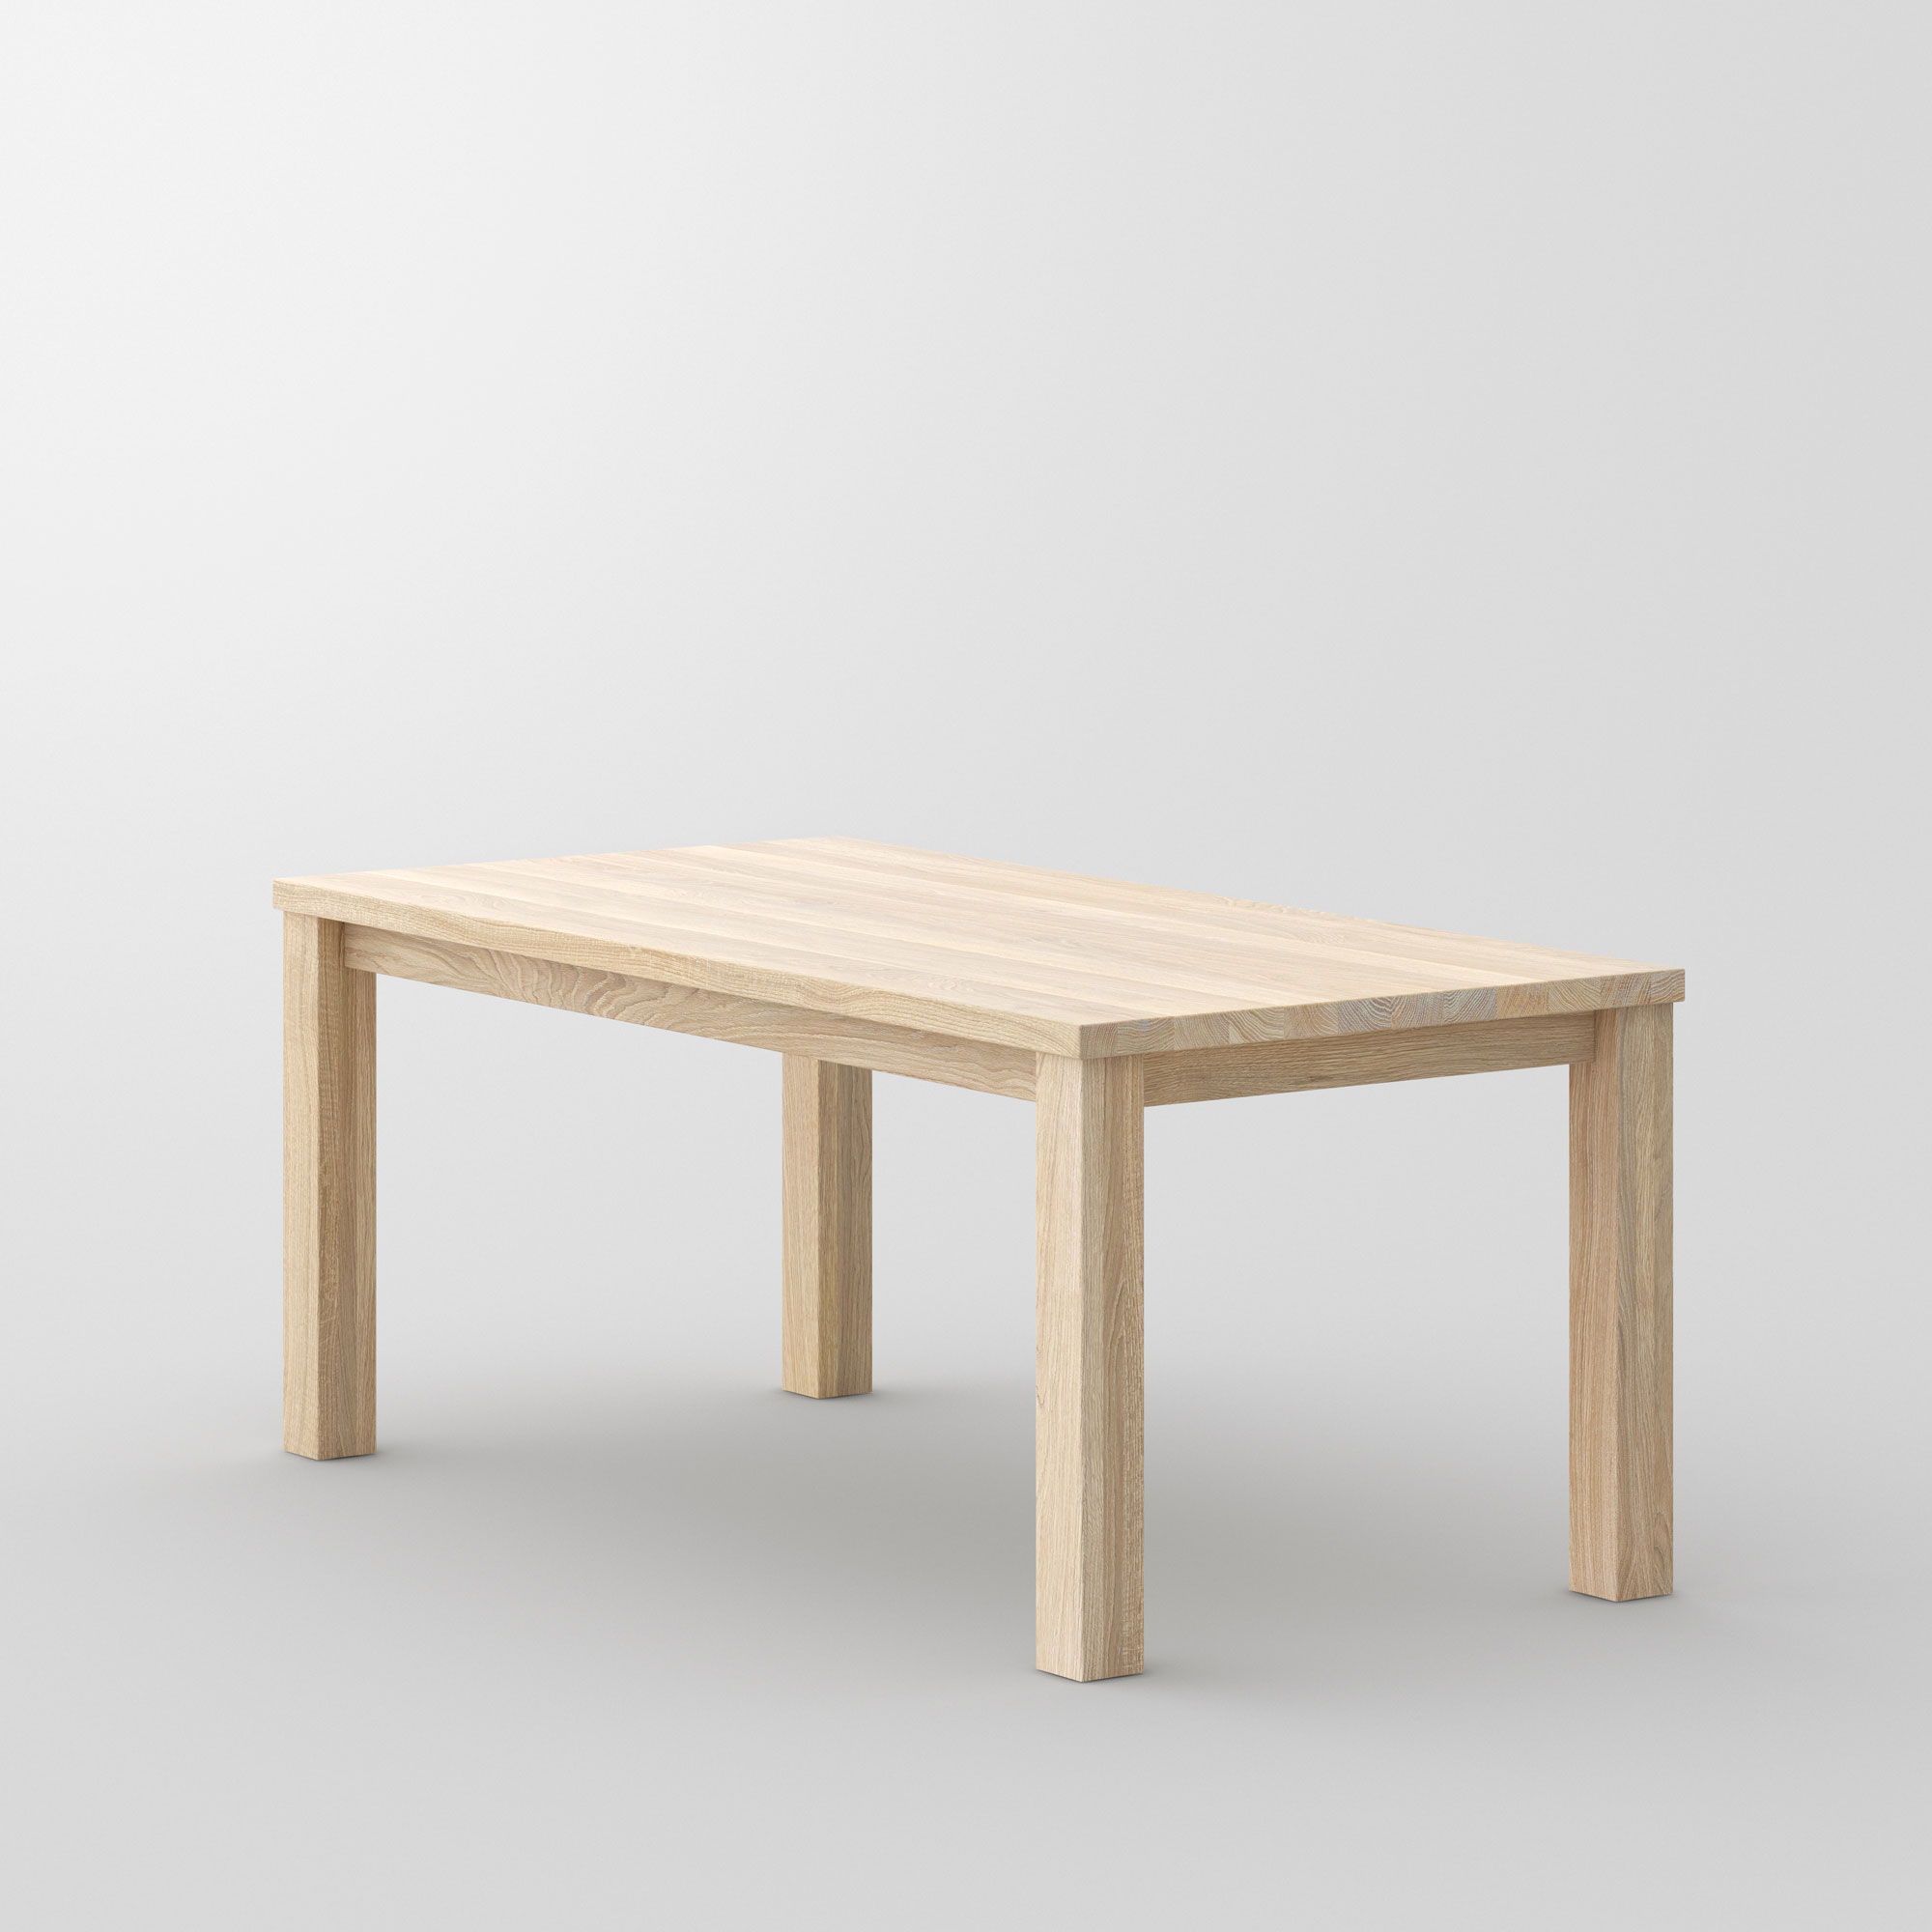 Tailor-Made Solid Wood Table FORTE 4 B9X9 cam3 custom made in solid wood by vitamin design